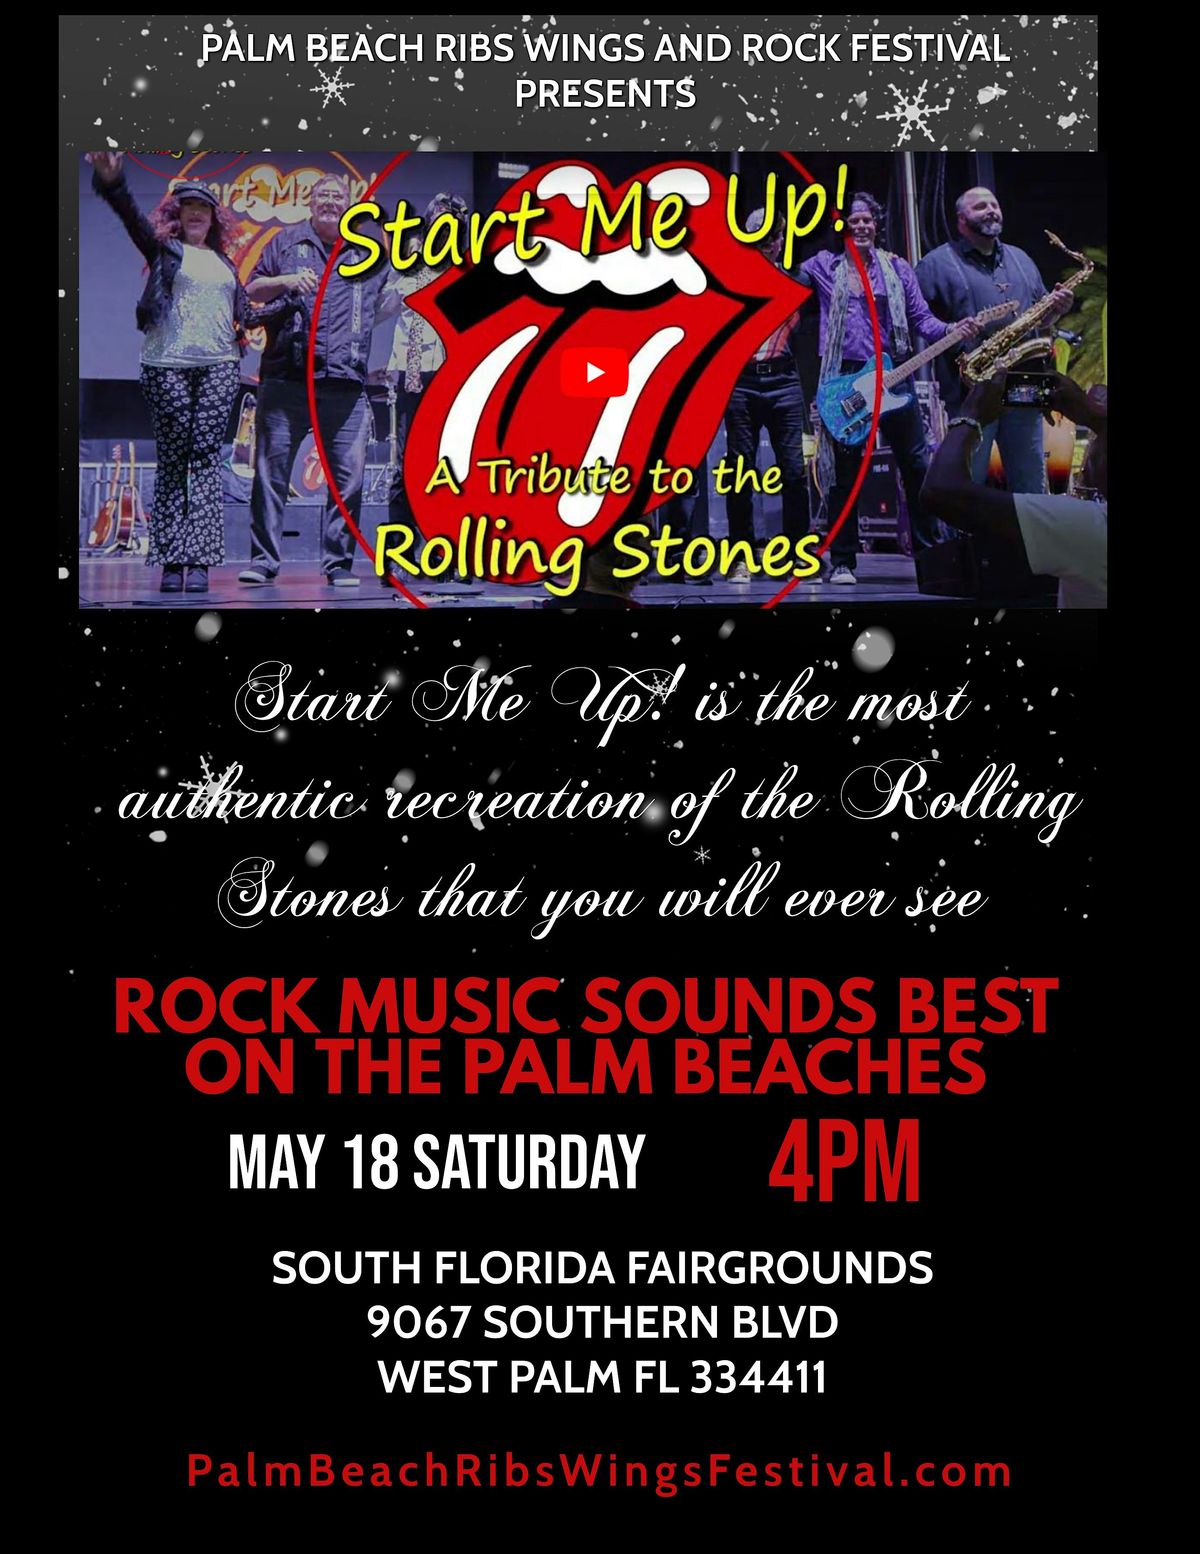 Start Me Up! is the most authentic recreation of the Rolling Stones